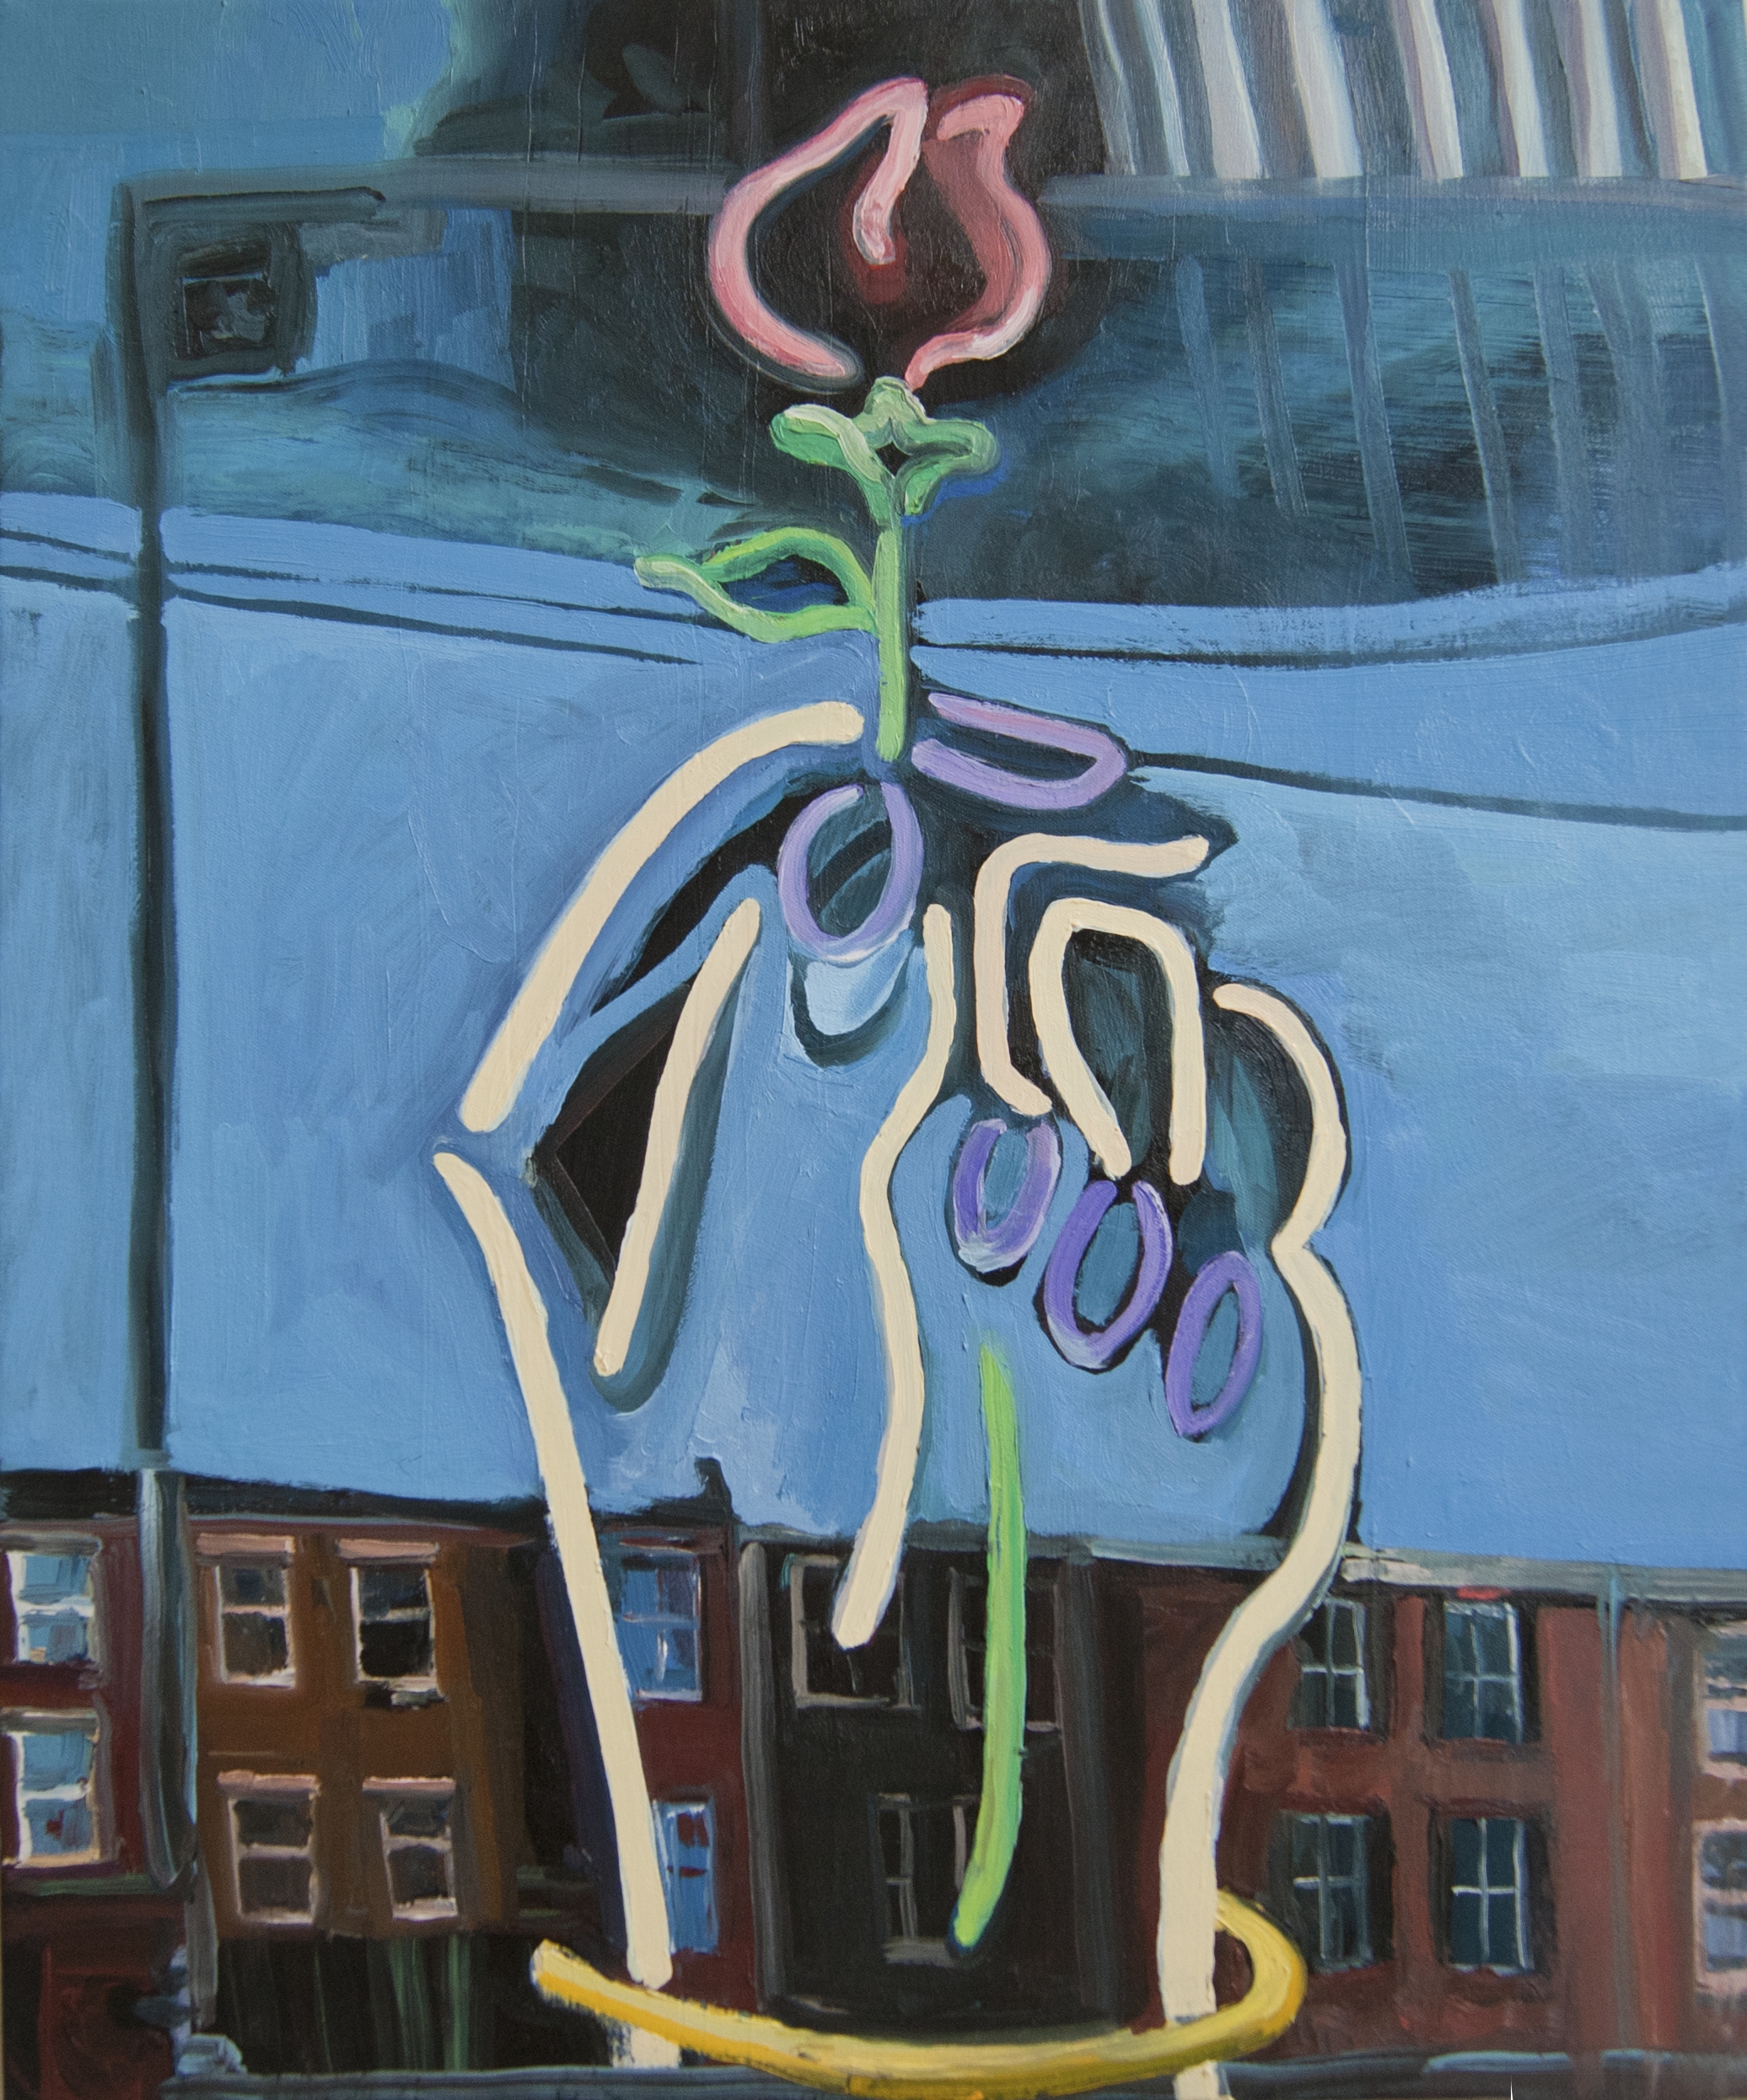  Neon Hand with Rose, 2013, oil on canvas, 20 x 24 inches. 